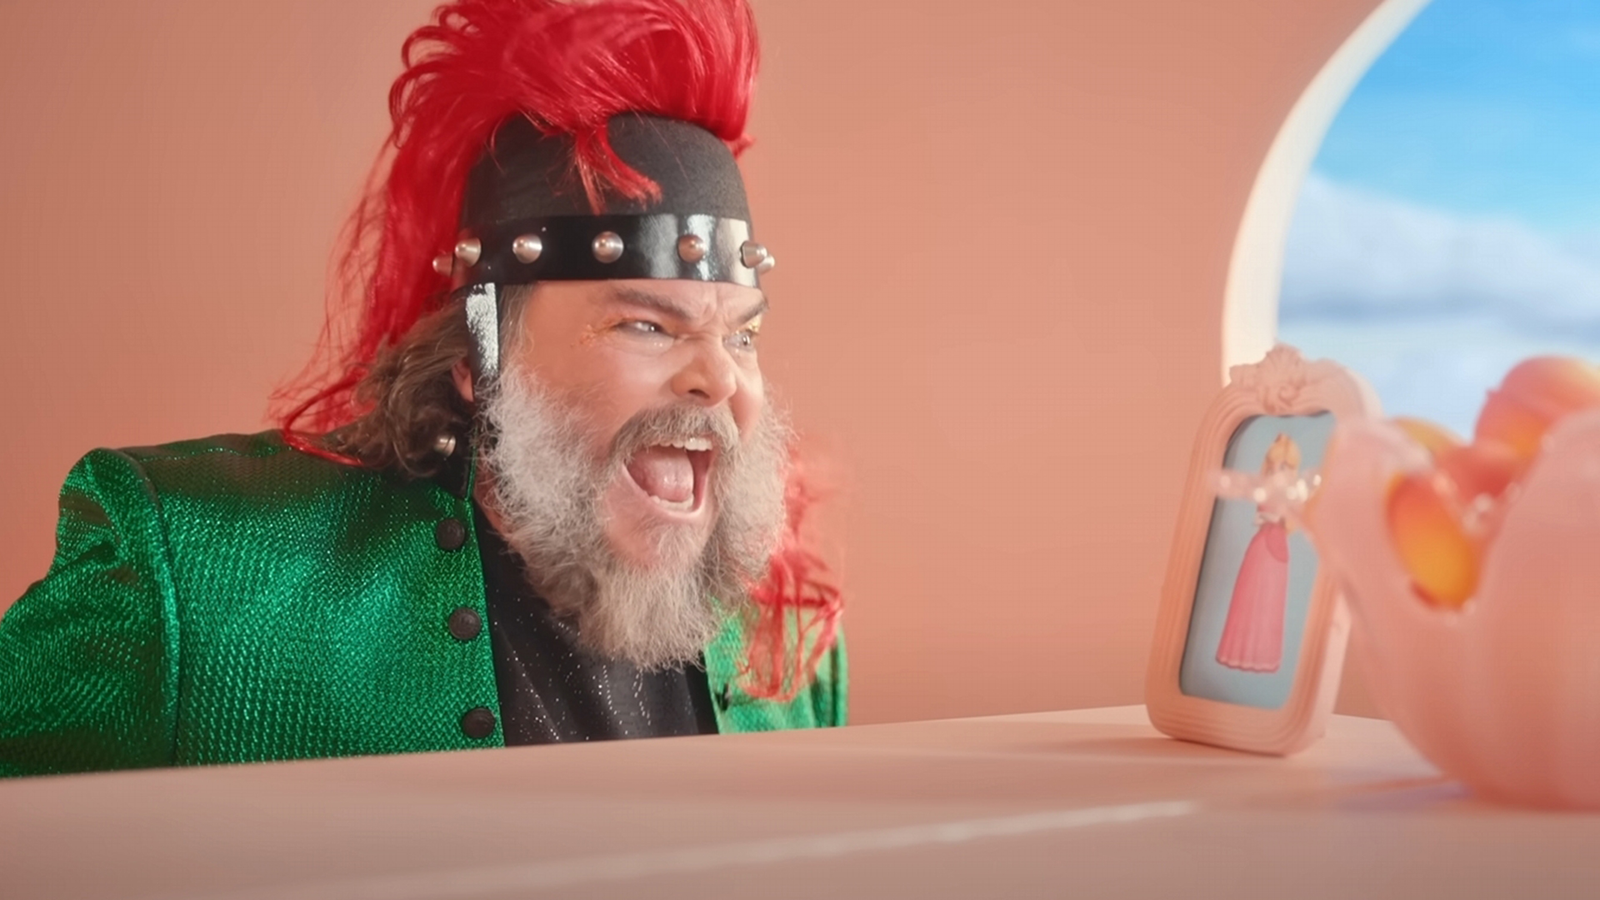 This Slaps:' Jack Black Was Apprehensive About Singing 'Peaches